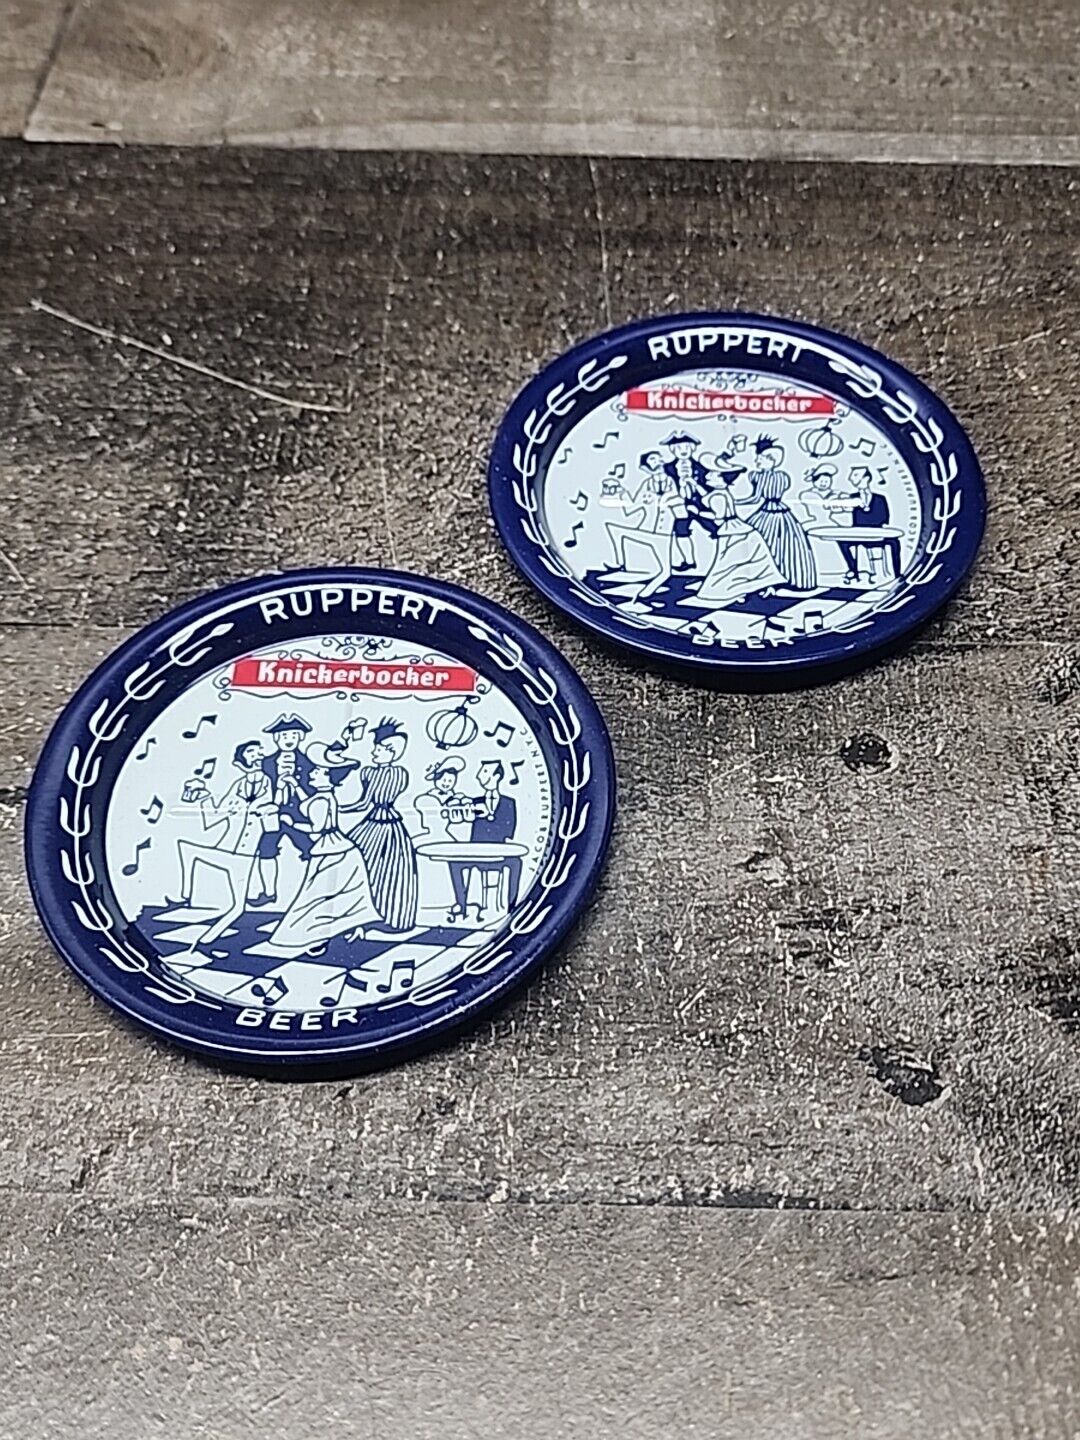 Ruppert Knickerbocker Beer Vintage Tin Coaster With Party  Graphics Set Of 2